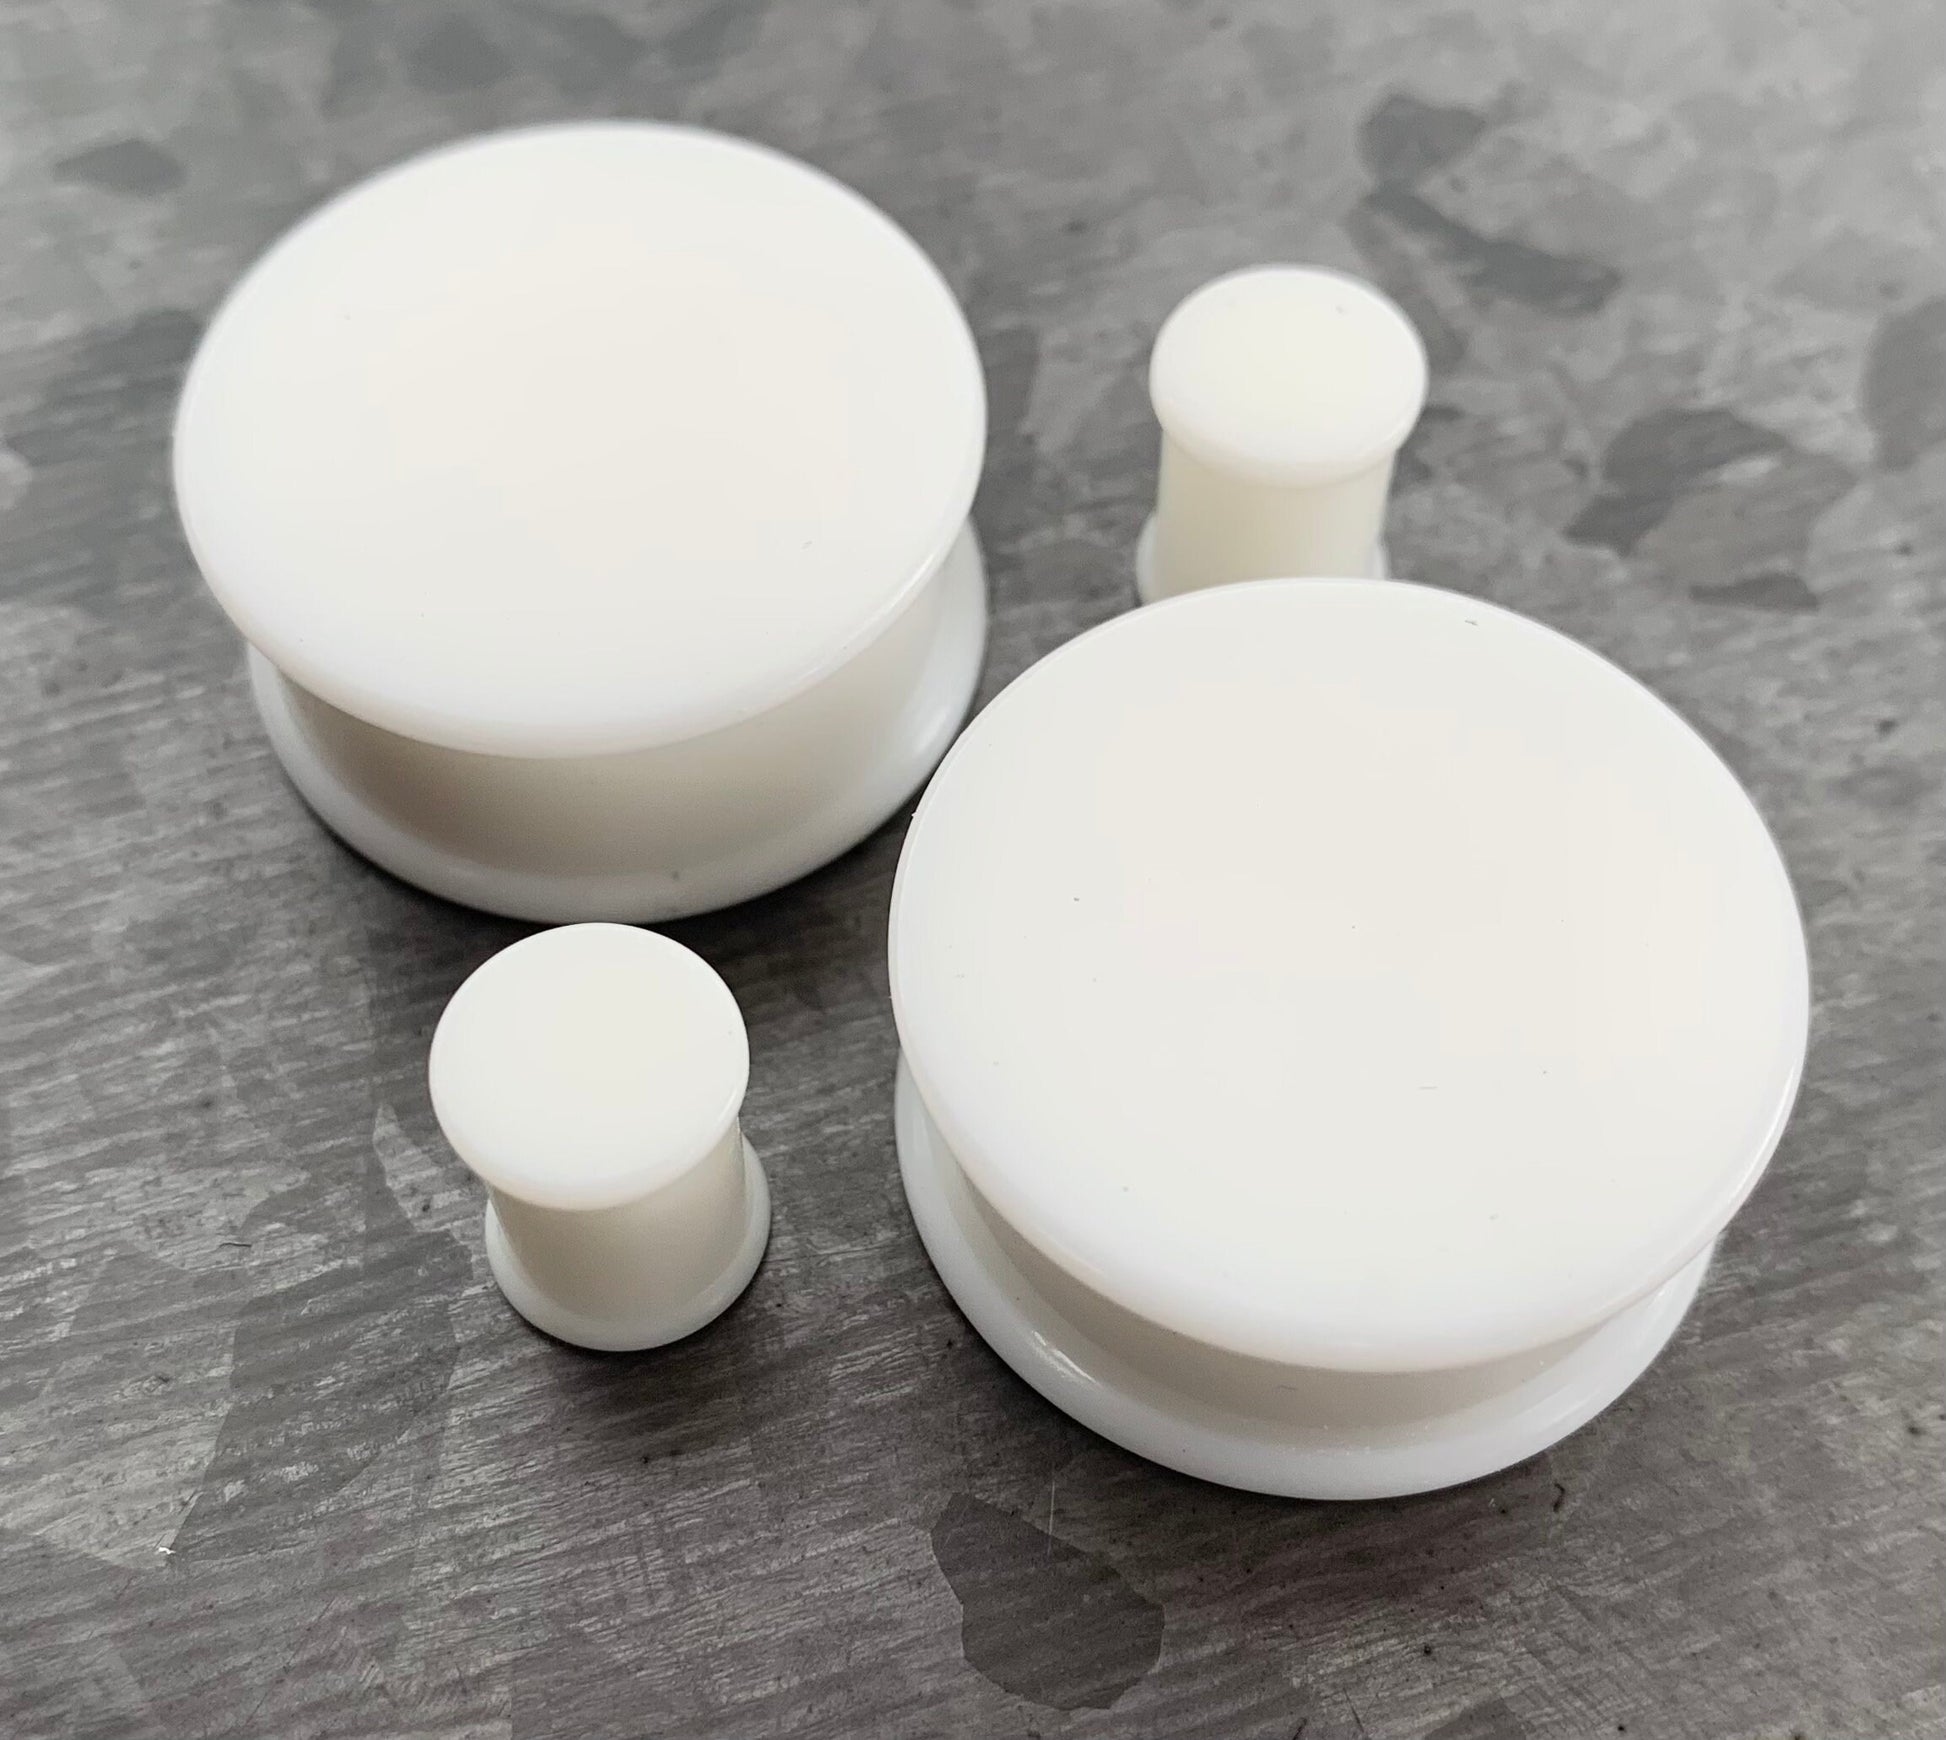 PAIR of Stunning Bright White Silicone Double Flare Plugs - Gauges 2g (6mm) up to 2" (51mm) available!